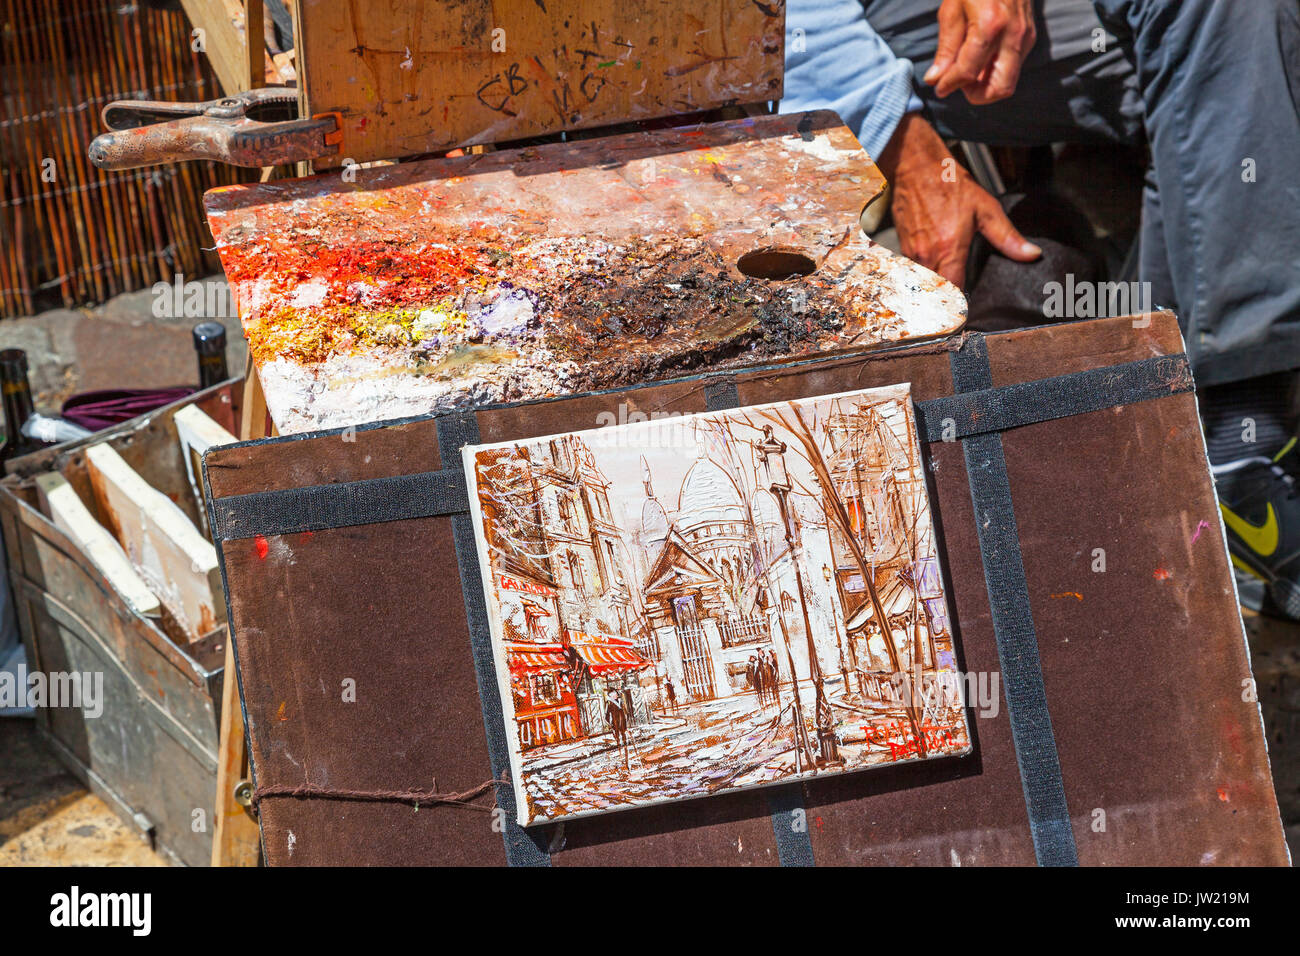 An artist's colorful palette and painting, in autumn shades of orange, red and brown, in Montmartre in Paris. Stock Photo